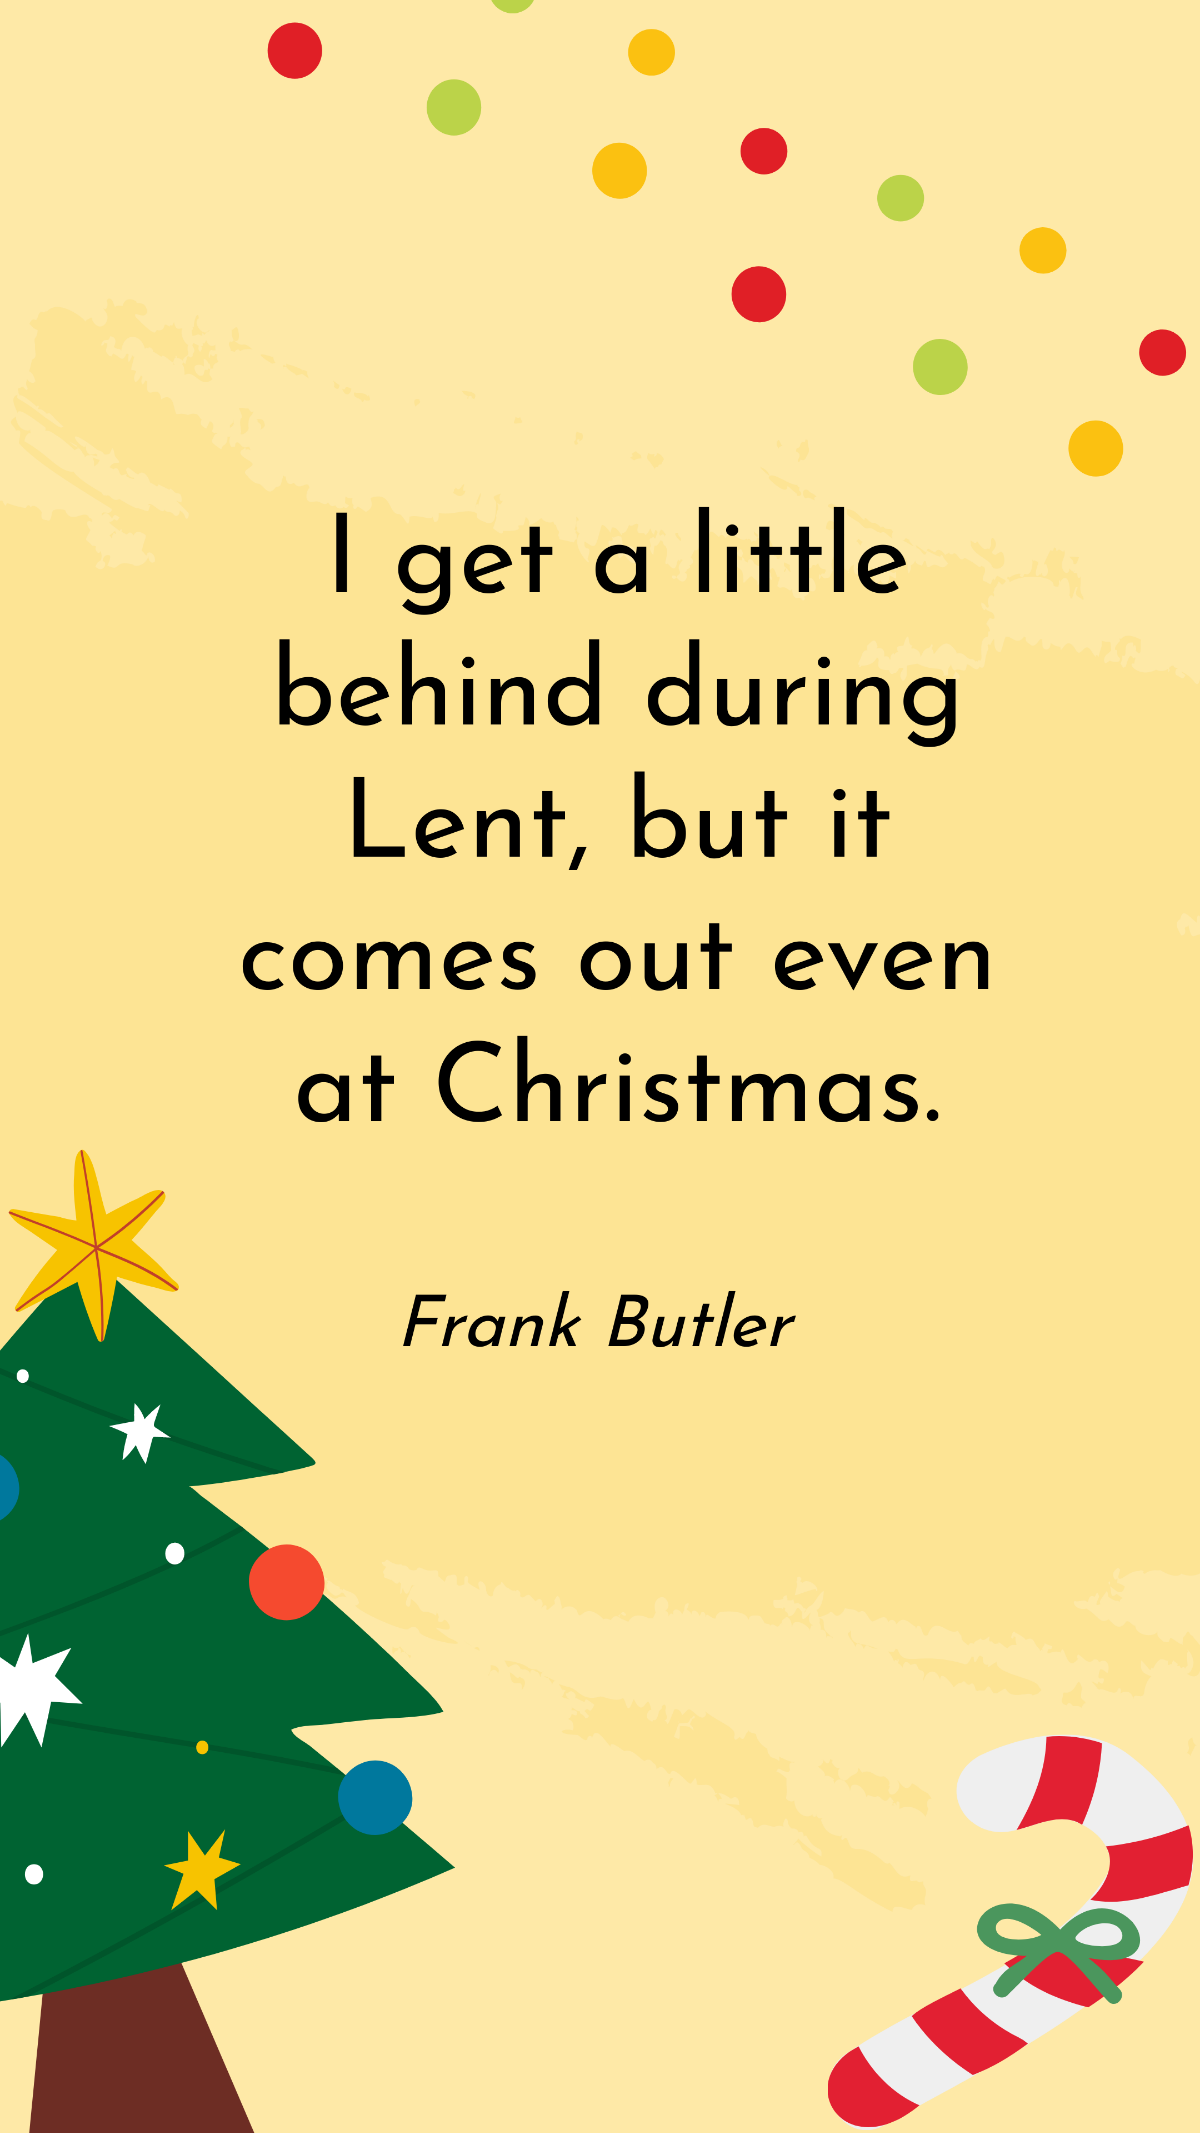 Frank Butler - I get a little behind during Lent, but it comes out even at Christmas. Template